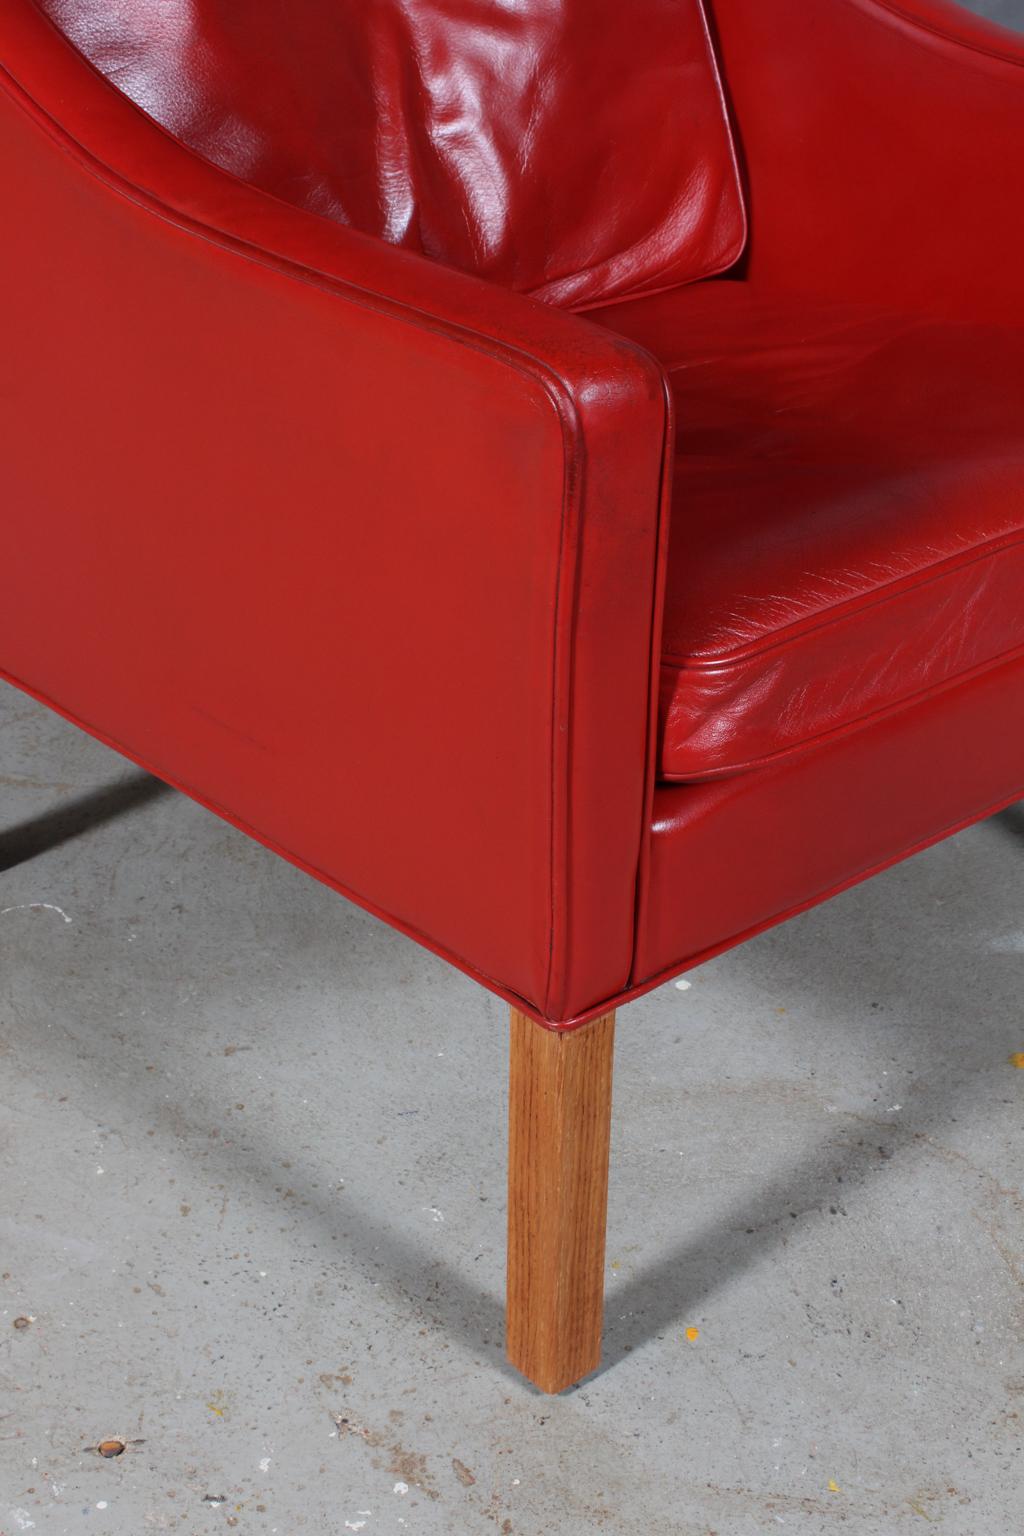 Mid-20th Century Børge Mogensen Wingback Chair in Original Red Leather, Model 2204